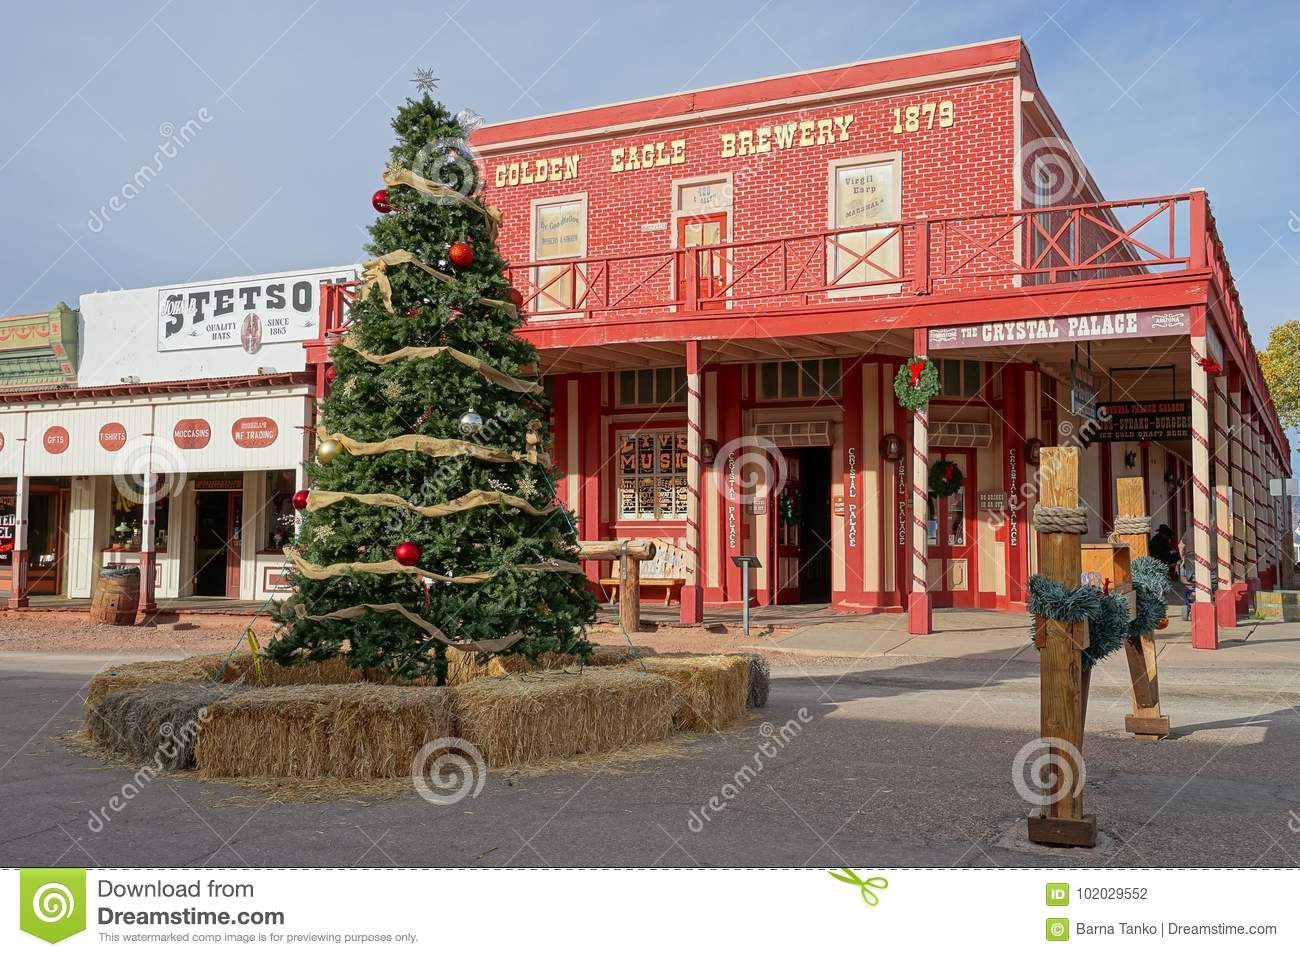 27 Fantastic Christmas Tree for Cemetery Vase 2024 free download christmas tree for cemetery vase of tombstone christmas www topsimages com with christmas tree front western building tombstone arizona december tombstone arizona usa christmas tree set up m